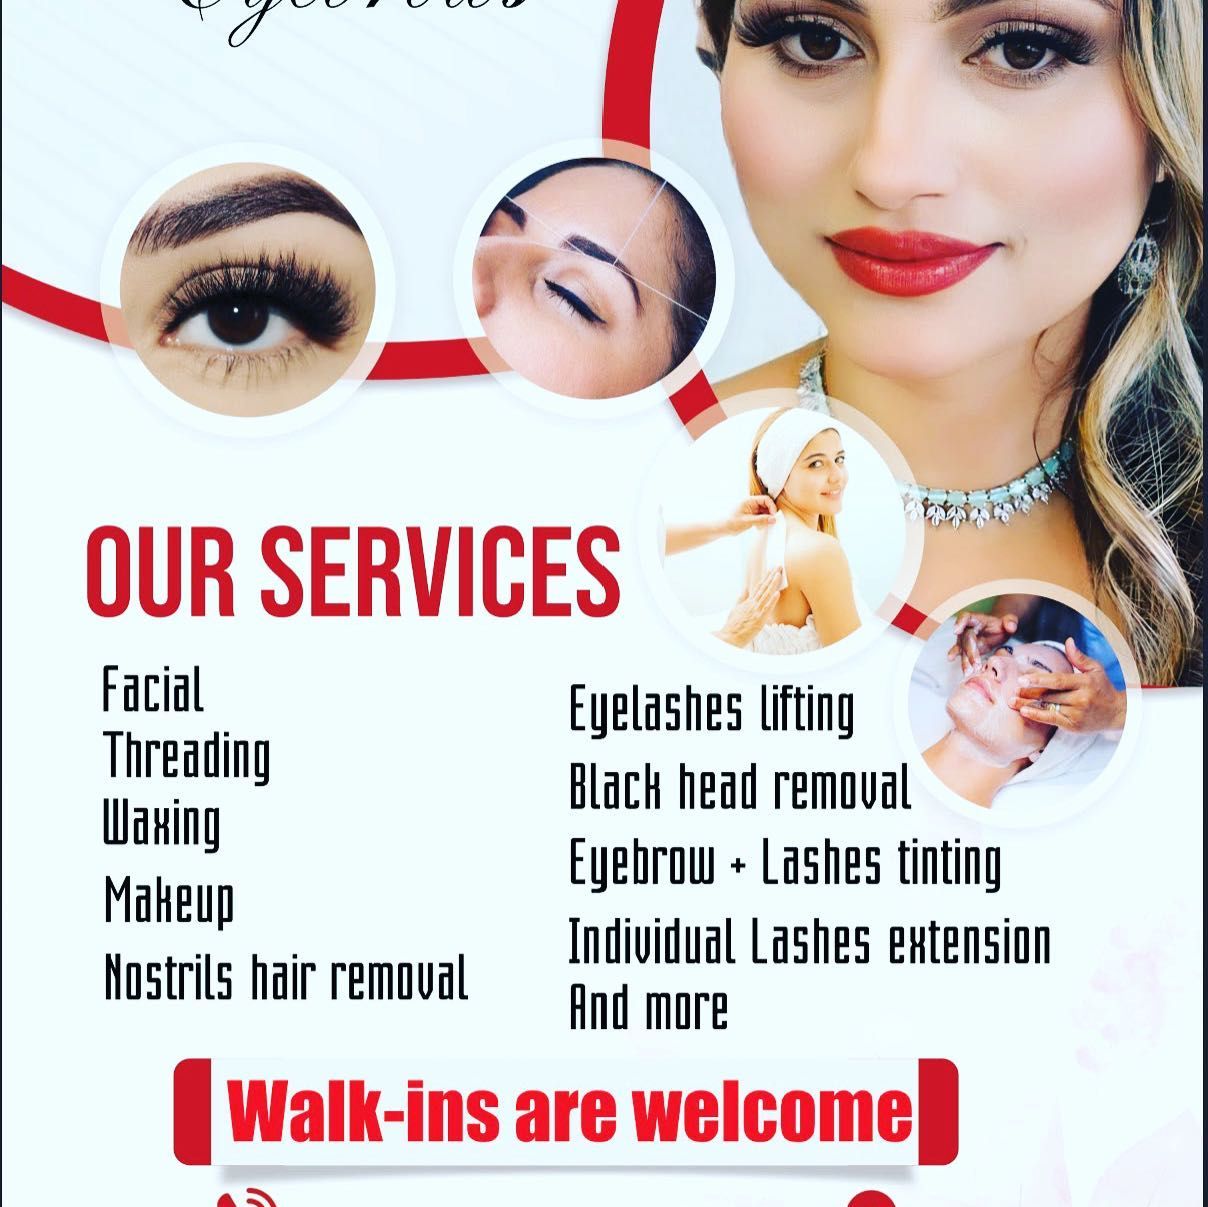 Beauty eyebrows threading&spa, 3542 Clairton Blvd, Brentwood, Pittsburgh, 15227